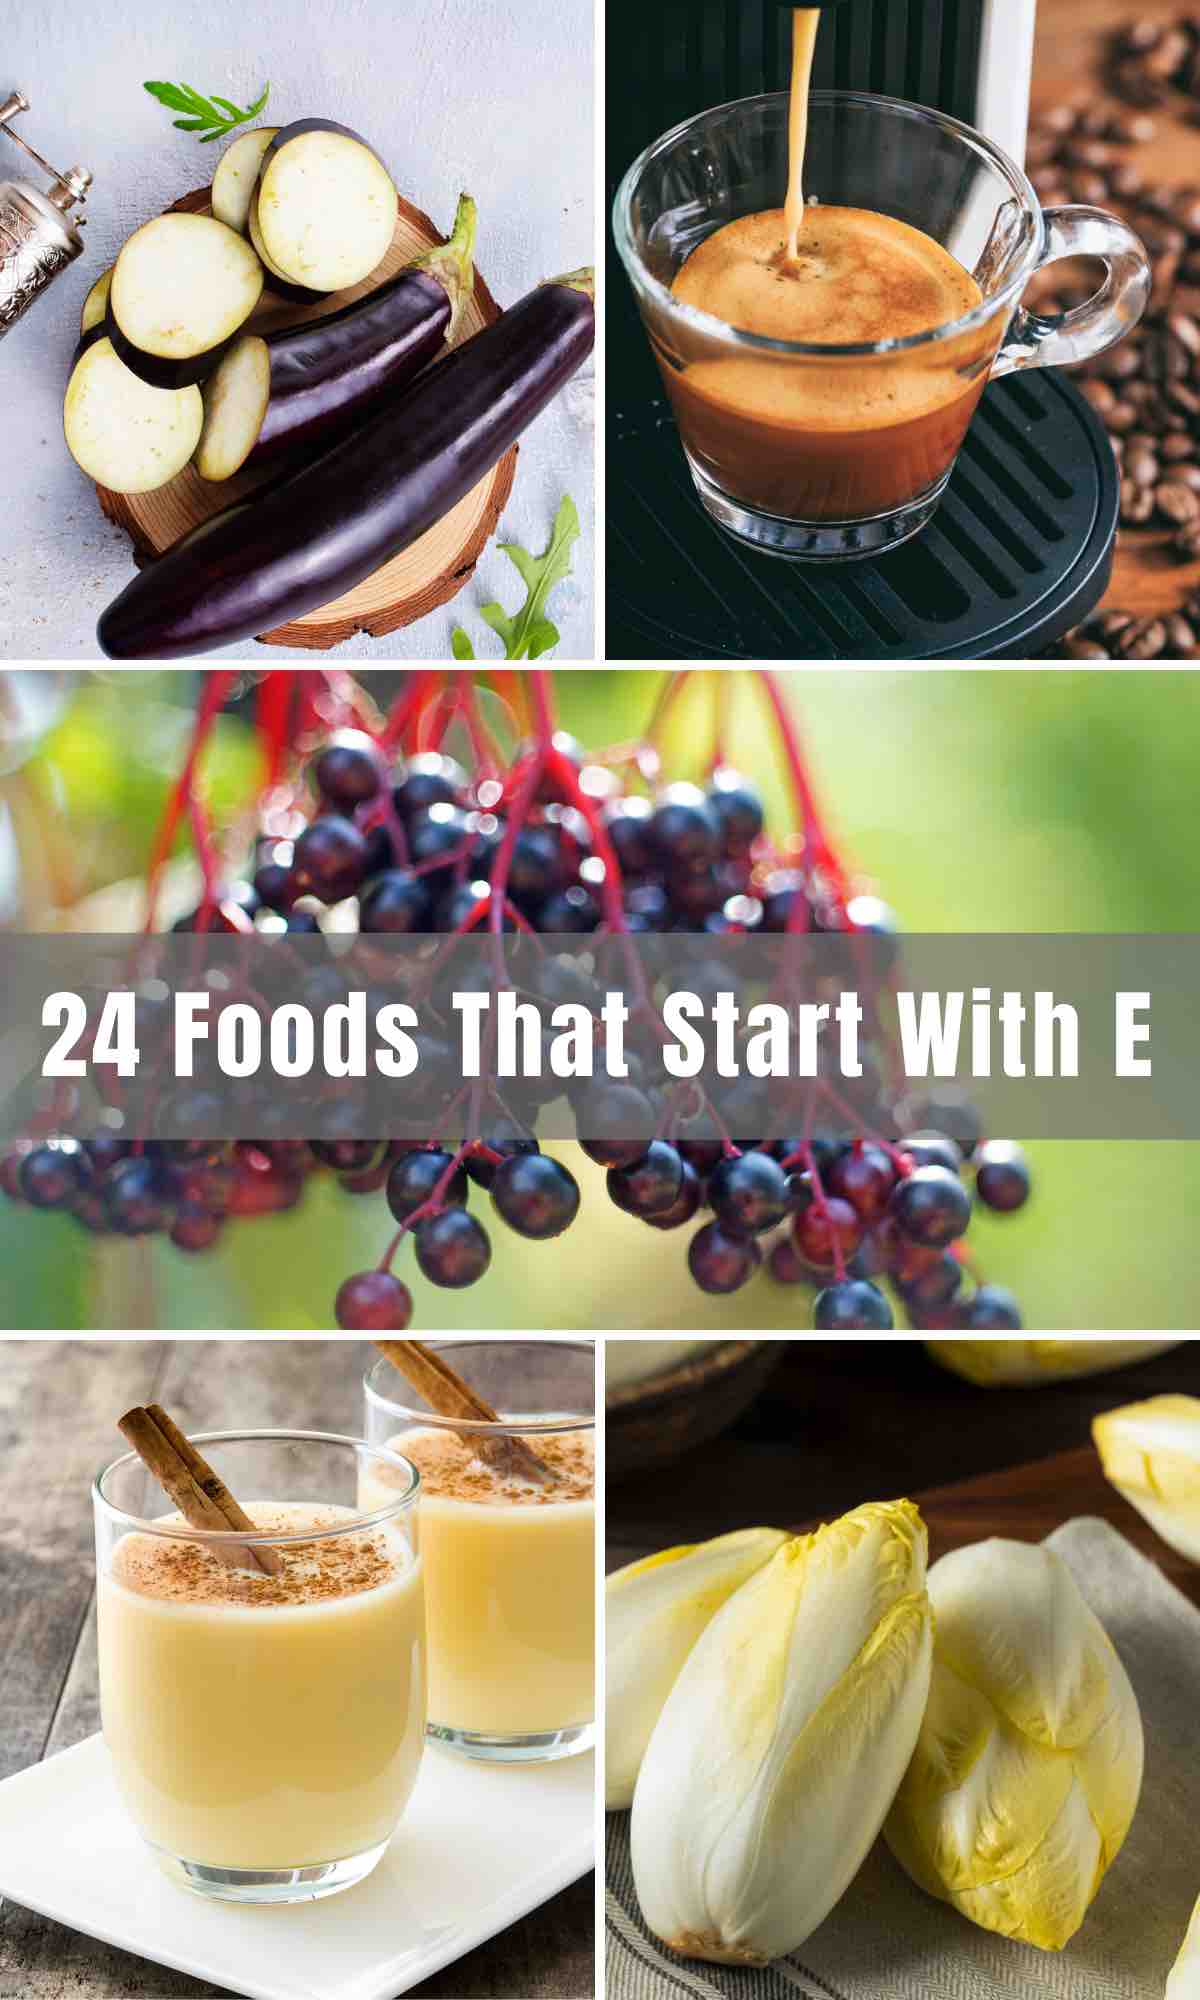 Whether you’re looking for a snack, breakfast meal, fruit, or even a drink, we have plenty of ‘Enticing’ Foods that Start with E. You can ‘Enjoy’ them alone or even pair them together! 